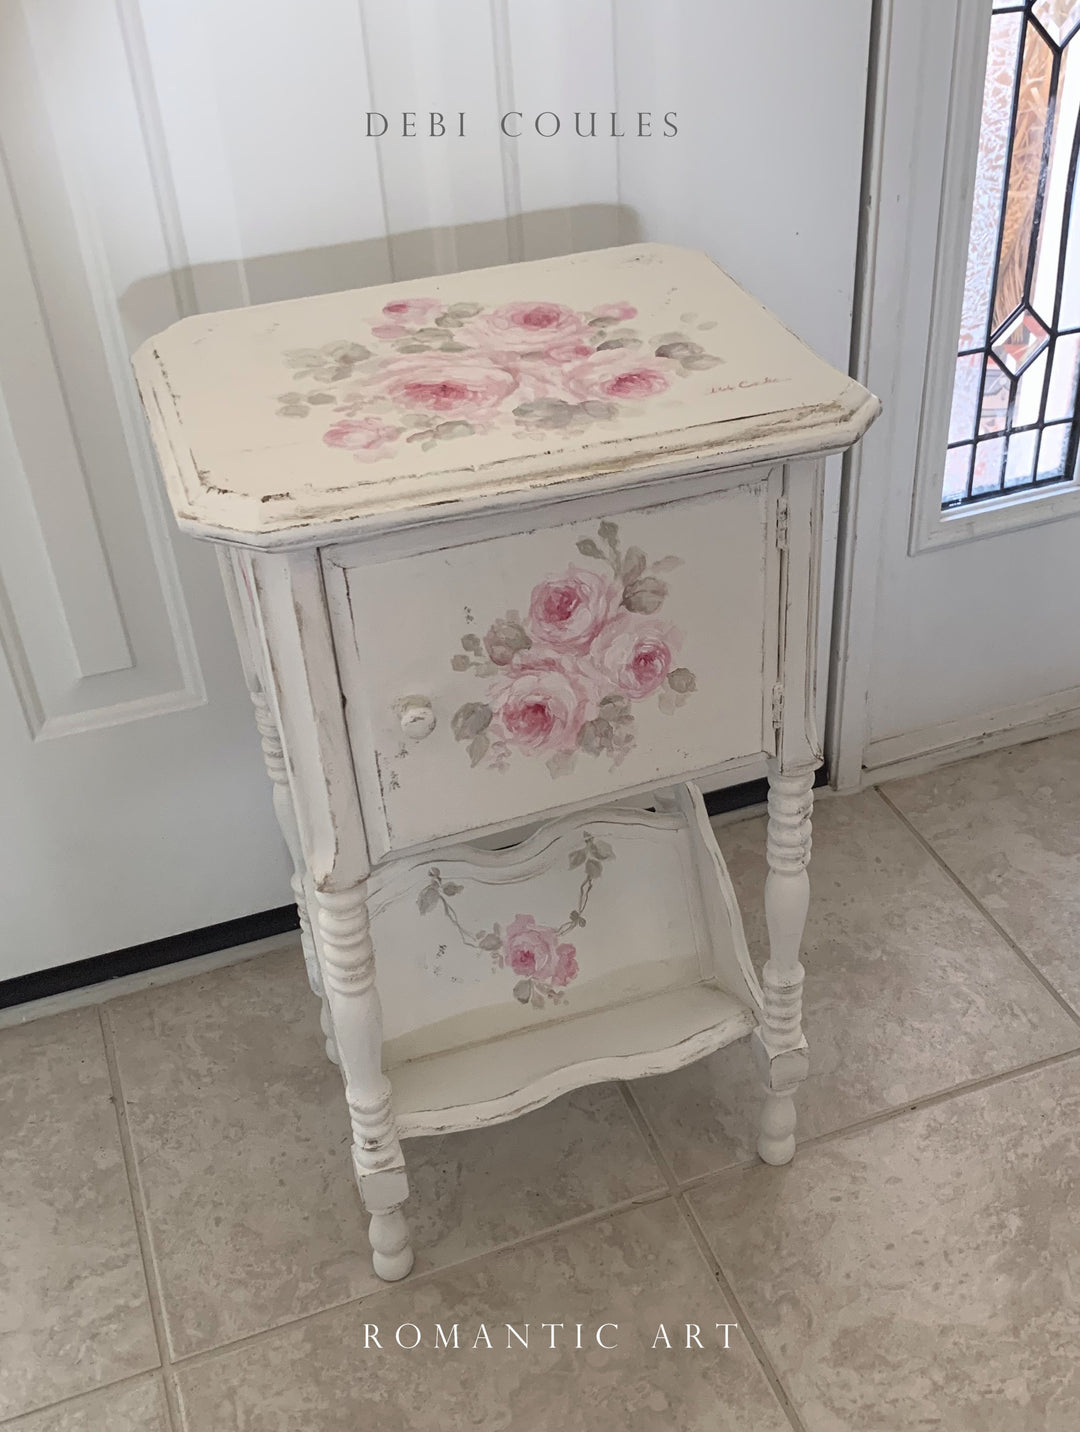 Vintage Romantic Roses Shabby Cottage Chic Cabinet by Debi Coules